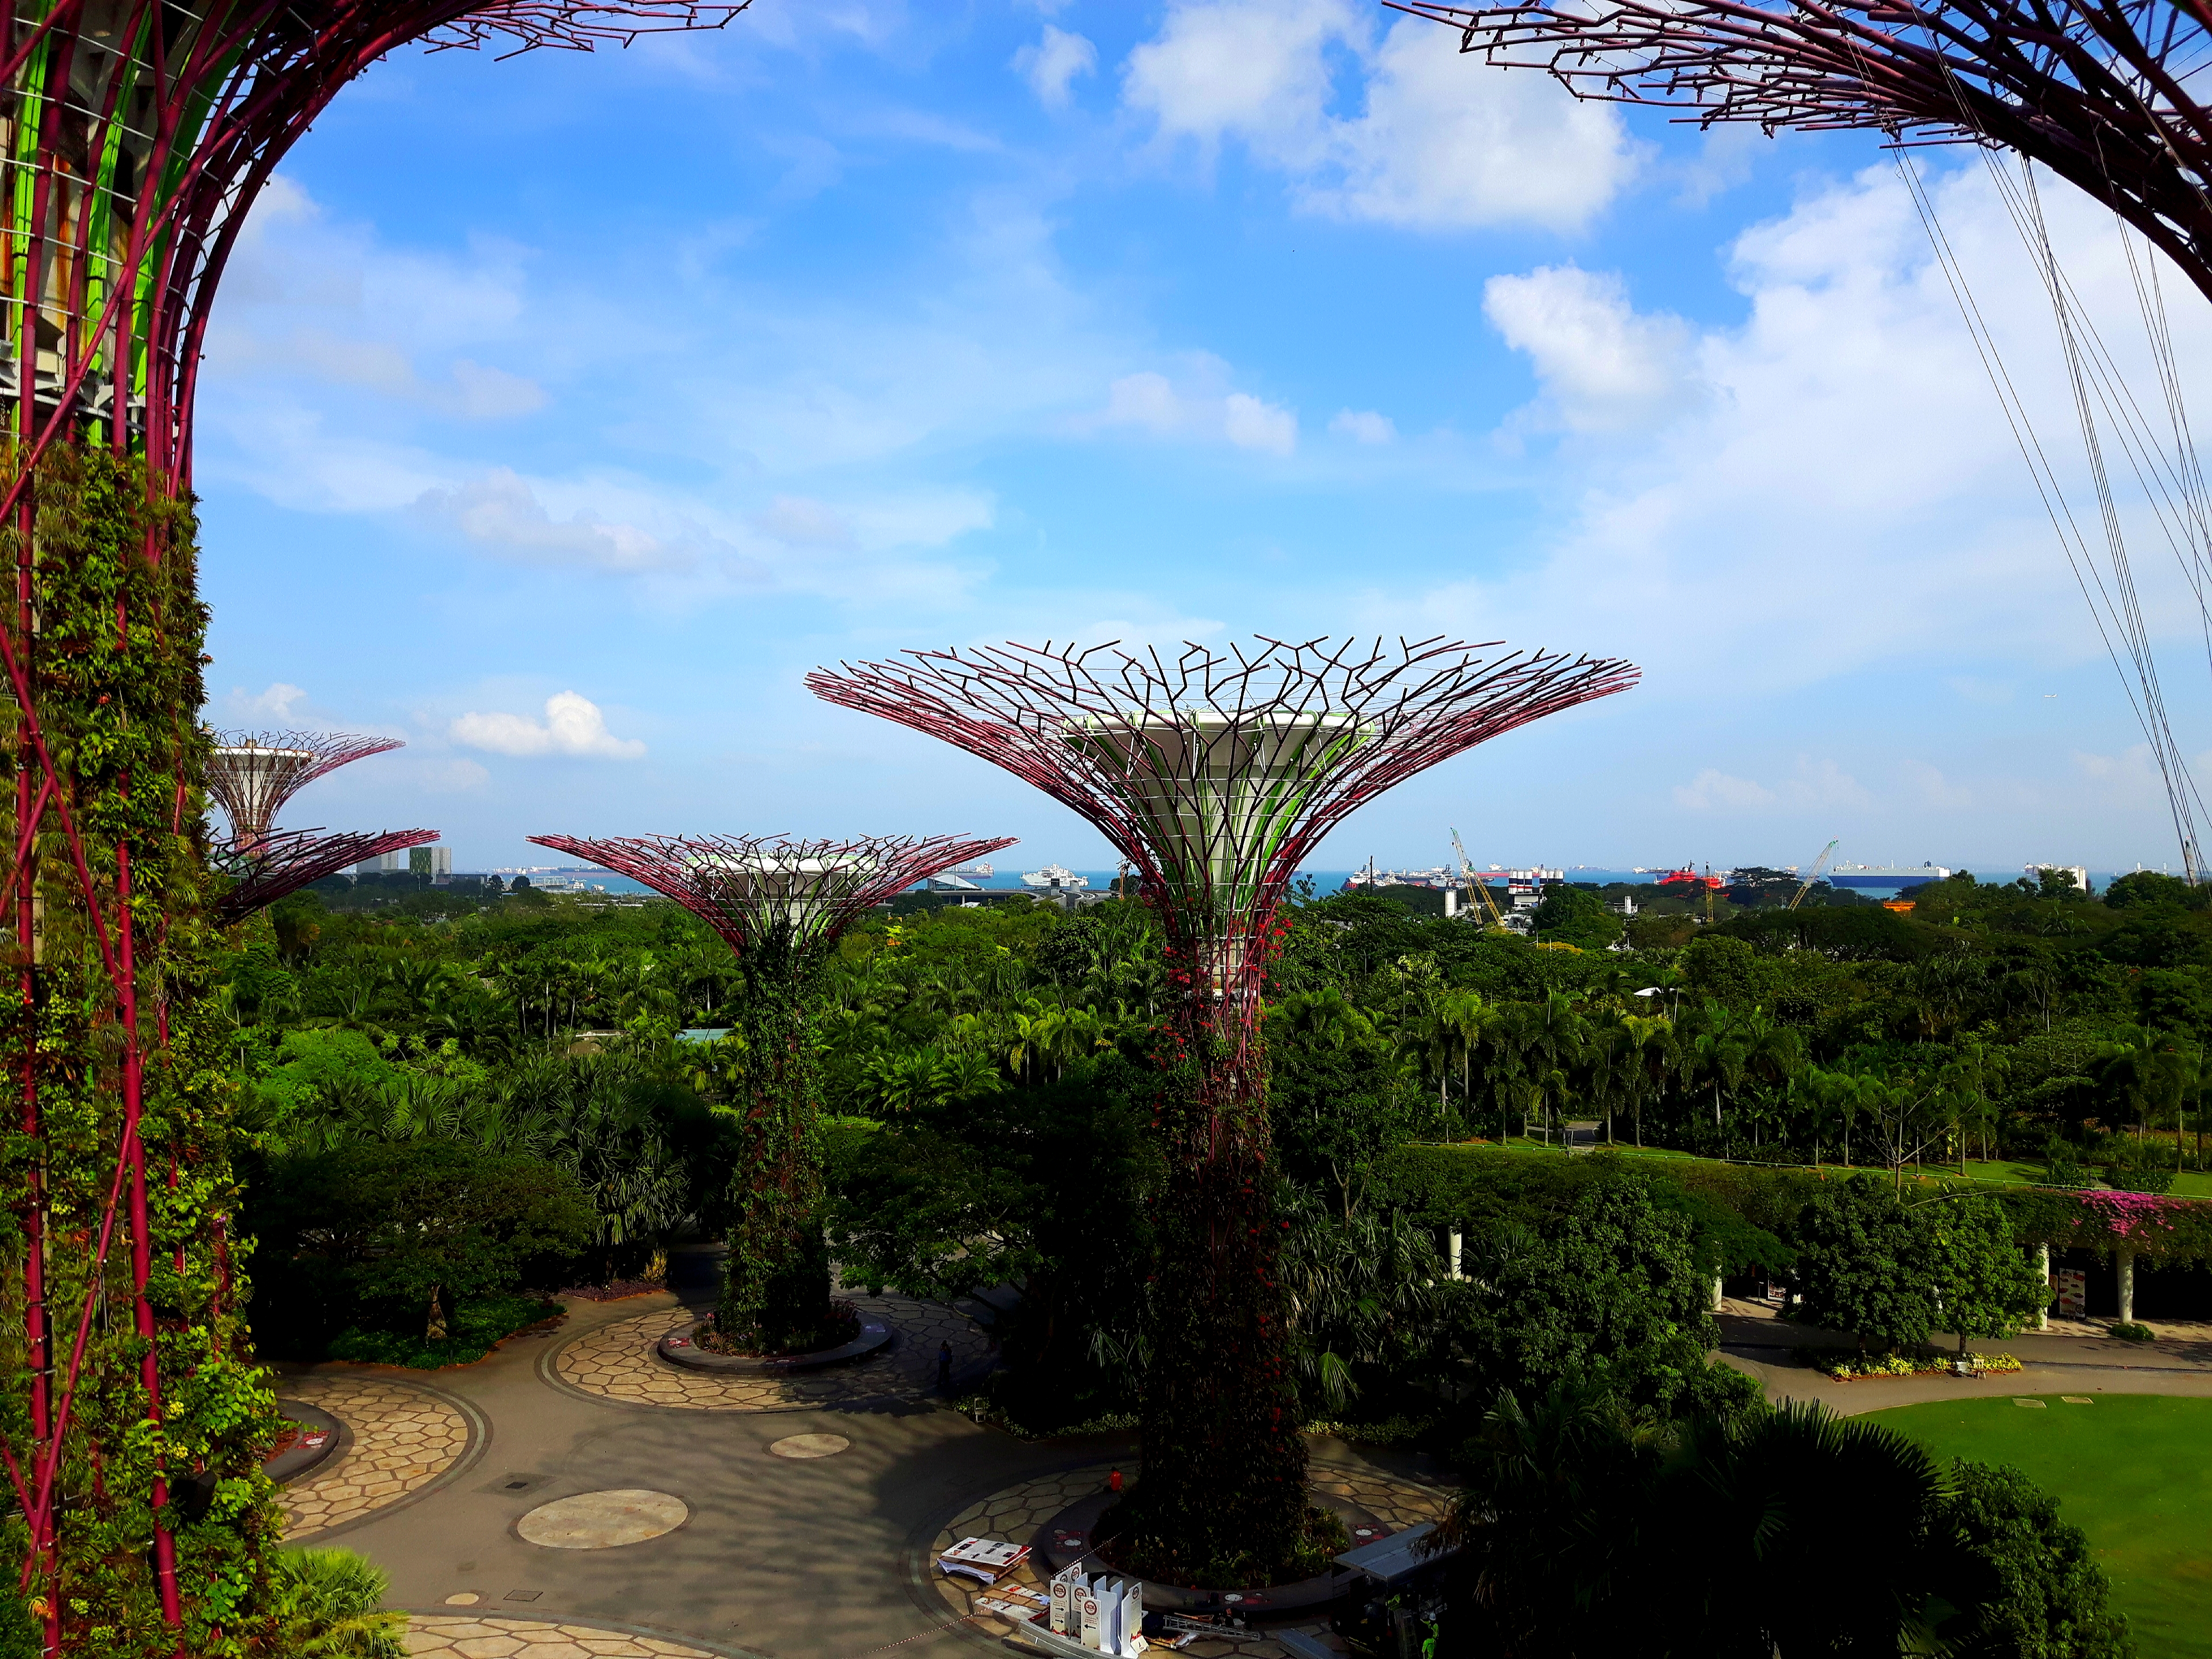 Gardens By The Bay - Supertrees